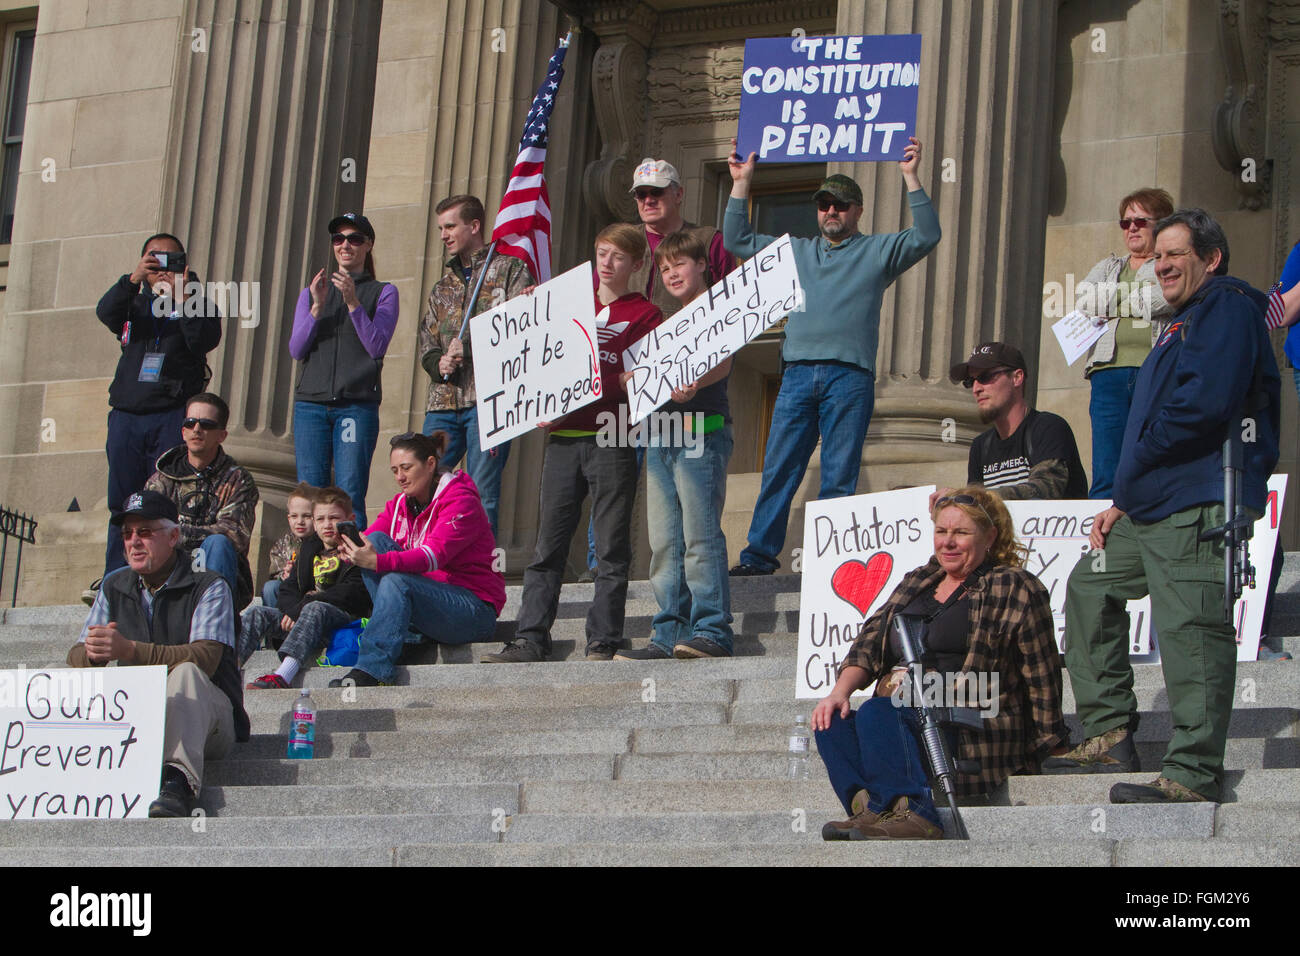 (20 February 2016) Gun owners rally at the Idaho Capitol steps in support of a proposed 'Constitutional Carry' law that would allow citizens to carry guns without permits whether concealed or not.  DAVID R. FRAZIER/ALAMY LIVE NEWS Stock Photo